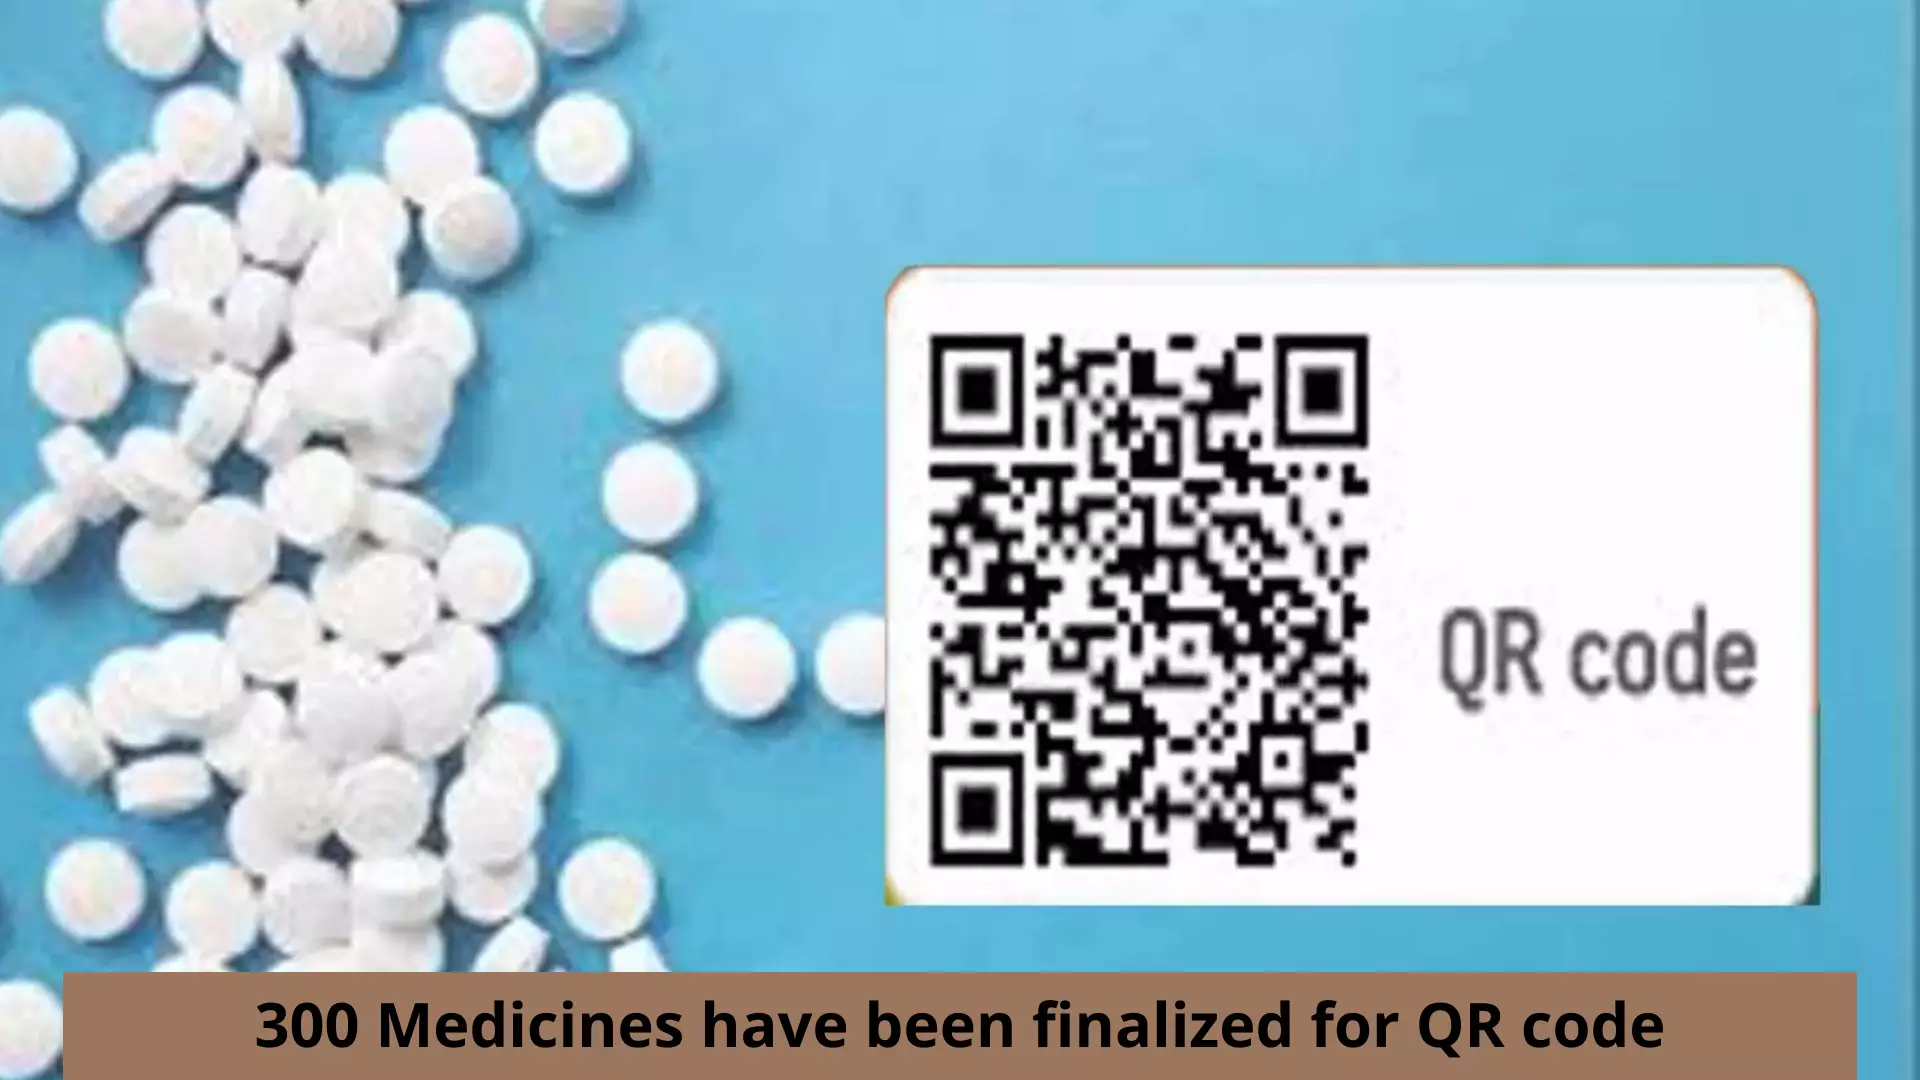 These 300 medicines have been finalized for QR code